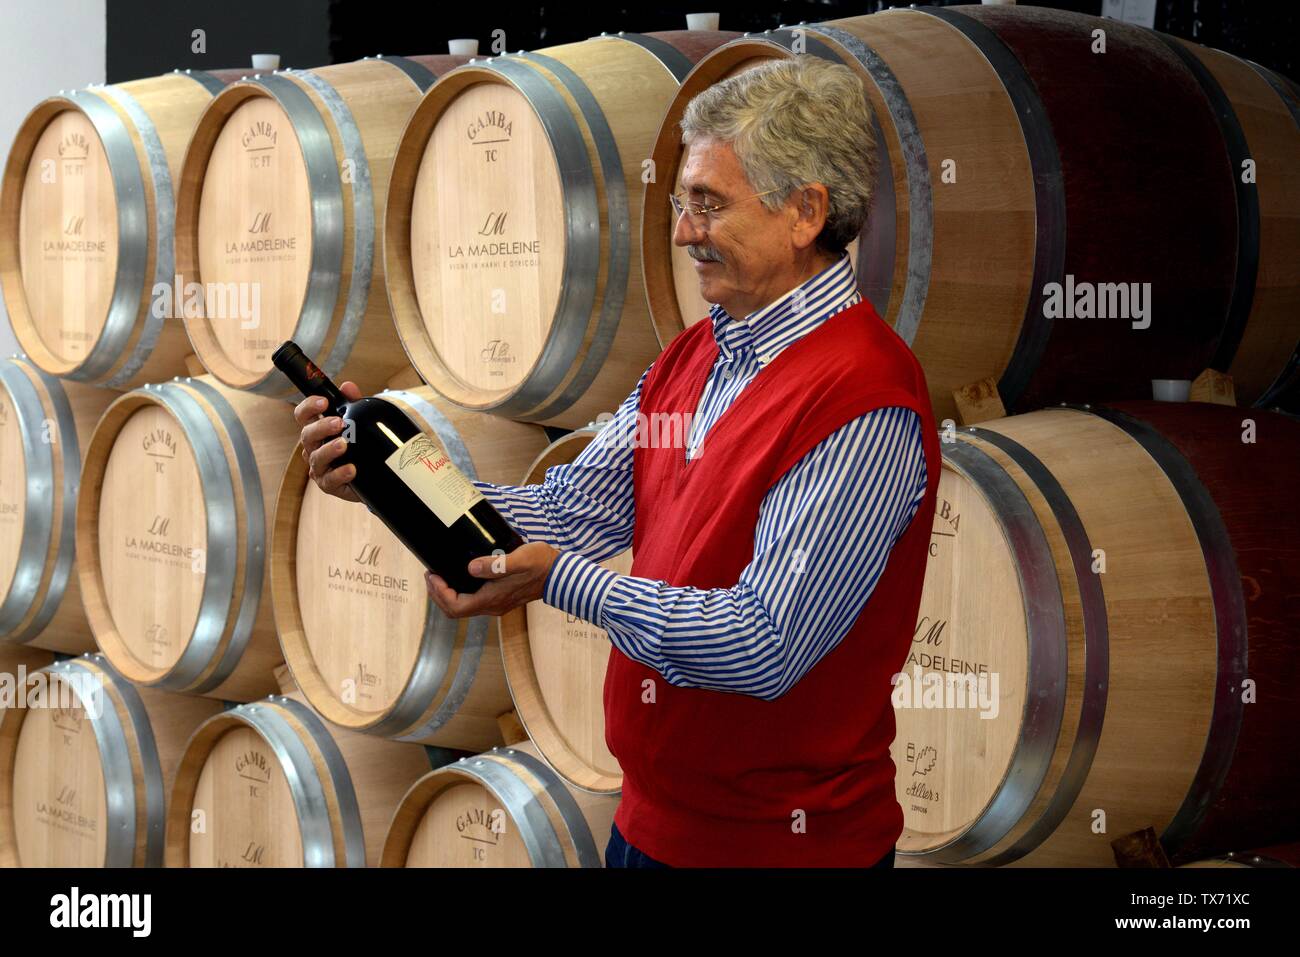 Former italian prime minister and minister of foreing affairs Massimo D'alema in the cellar of his estate 'Cantina La Madeleine' where he produces win Stock Photo